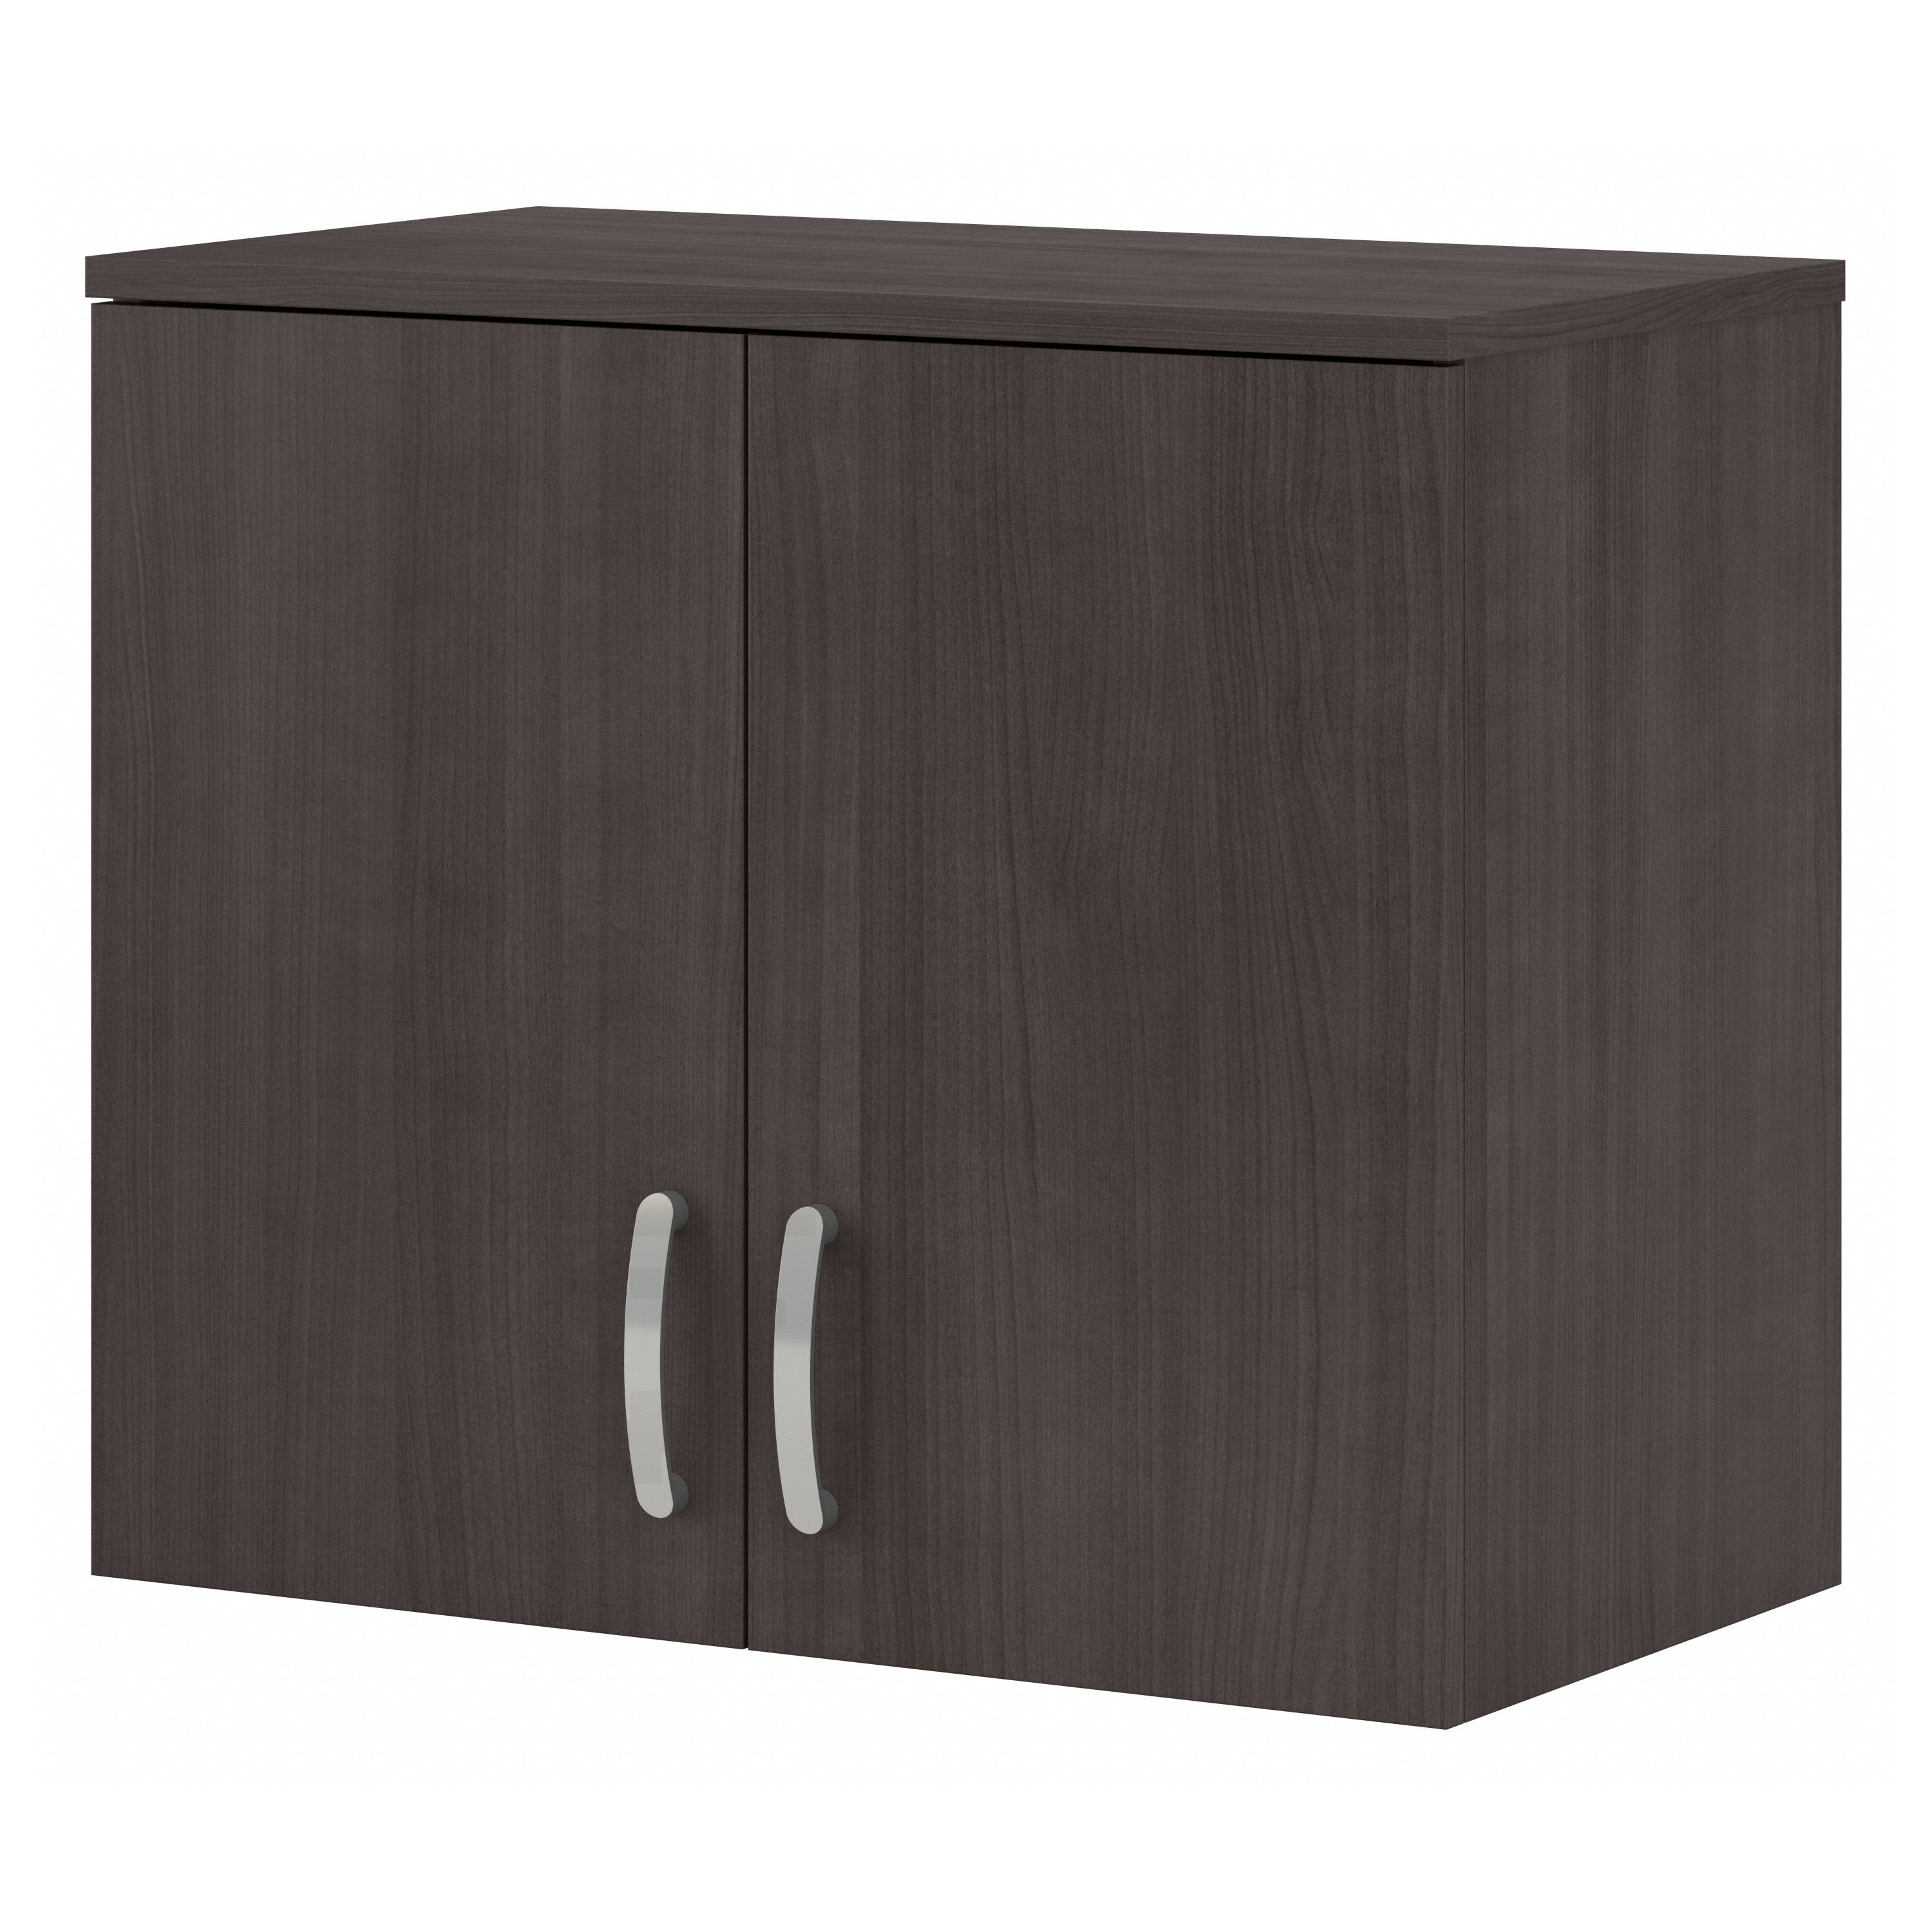 Shop Bush Business Furniture Universal Closet Wall Cabinet with Doors and Shelves 02 CLS428SG-Z #color_storm gray